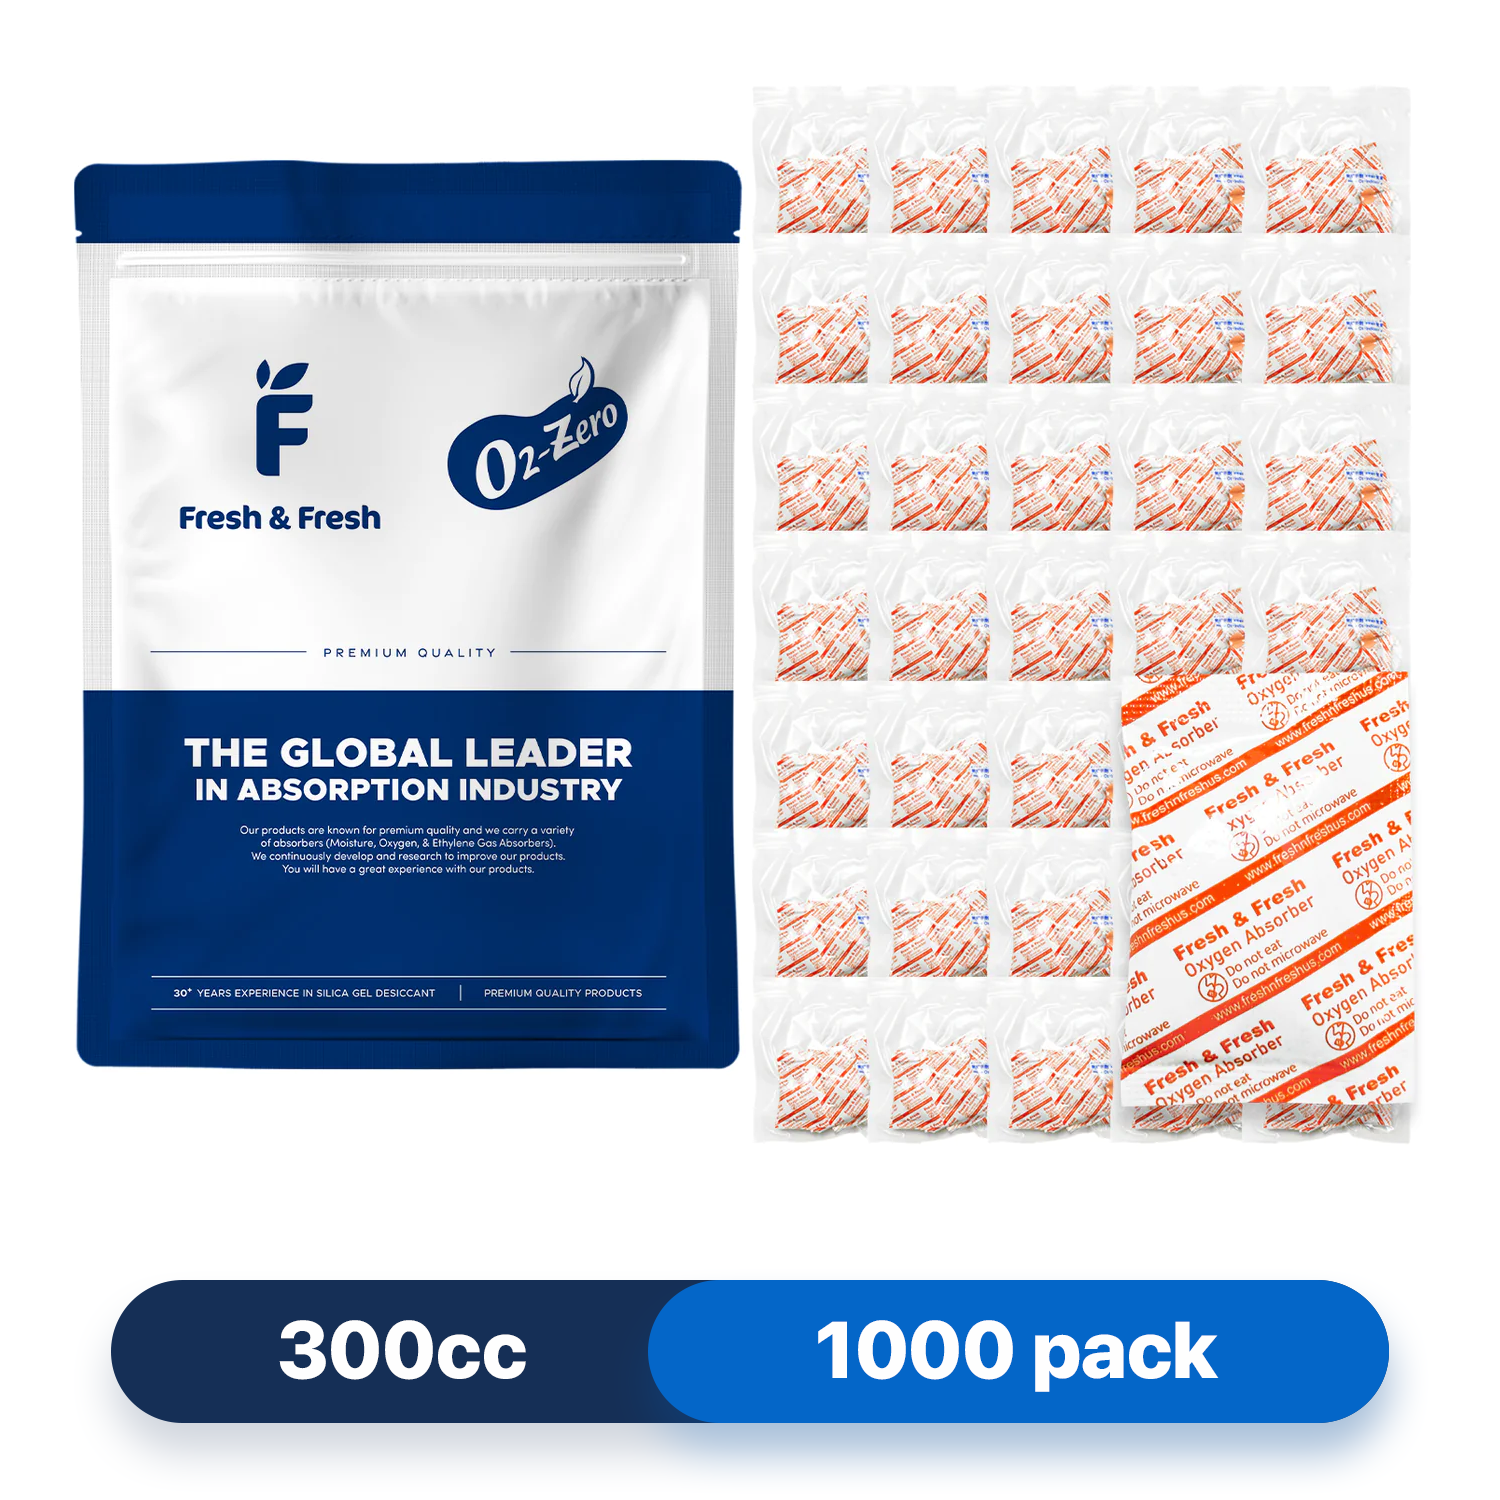 Vacuum Sealing Mylar Bags The Easy Way! Please read the description  about oxygen absorbers 